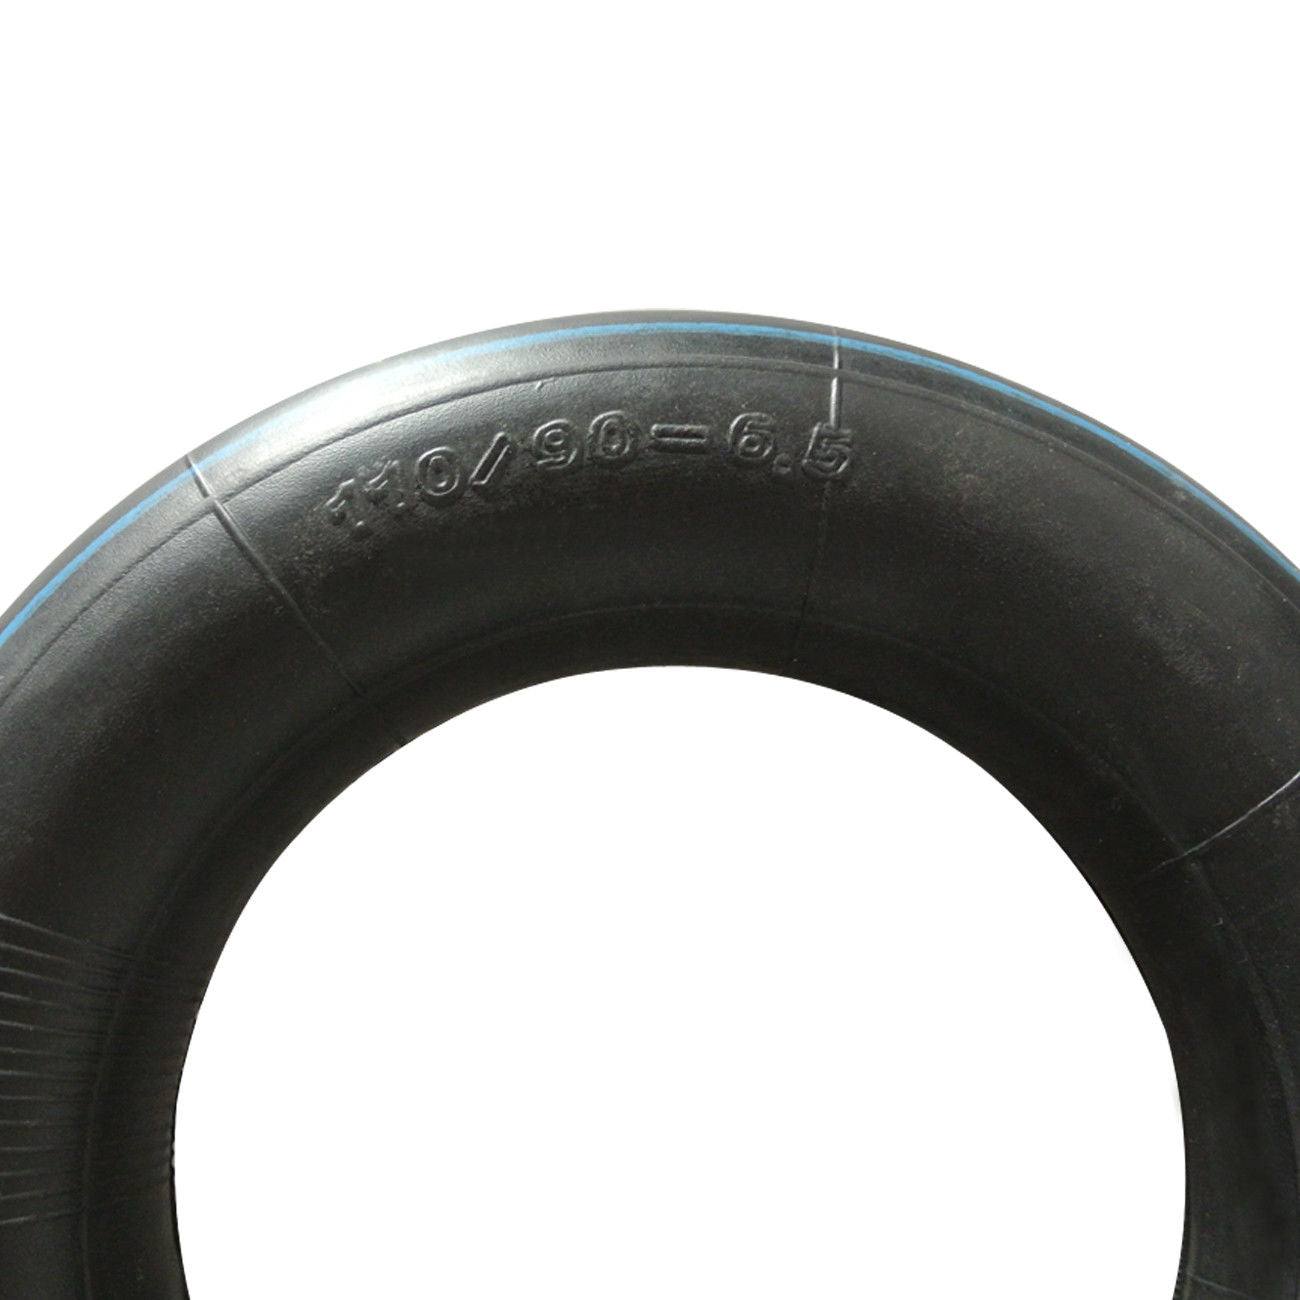 1pc Pocket Bike Inner Tube 110/90-6.5 Tire Fits Gas Electric Scooter 37 47 49cc - TDRMOTO